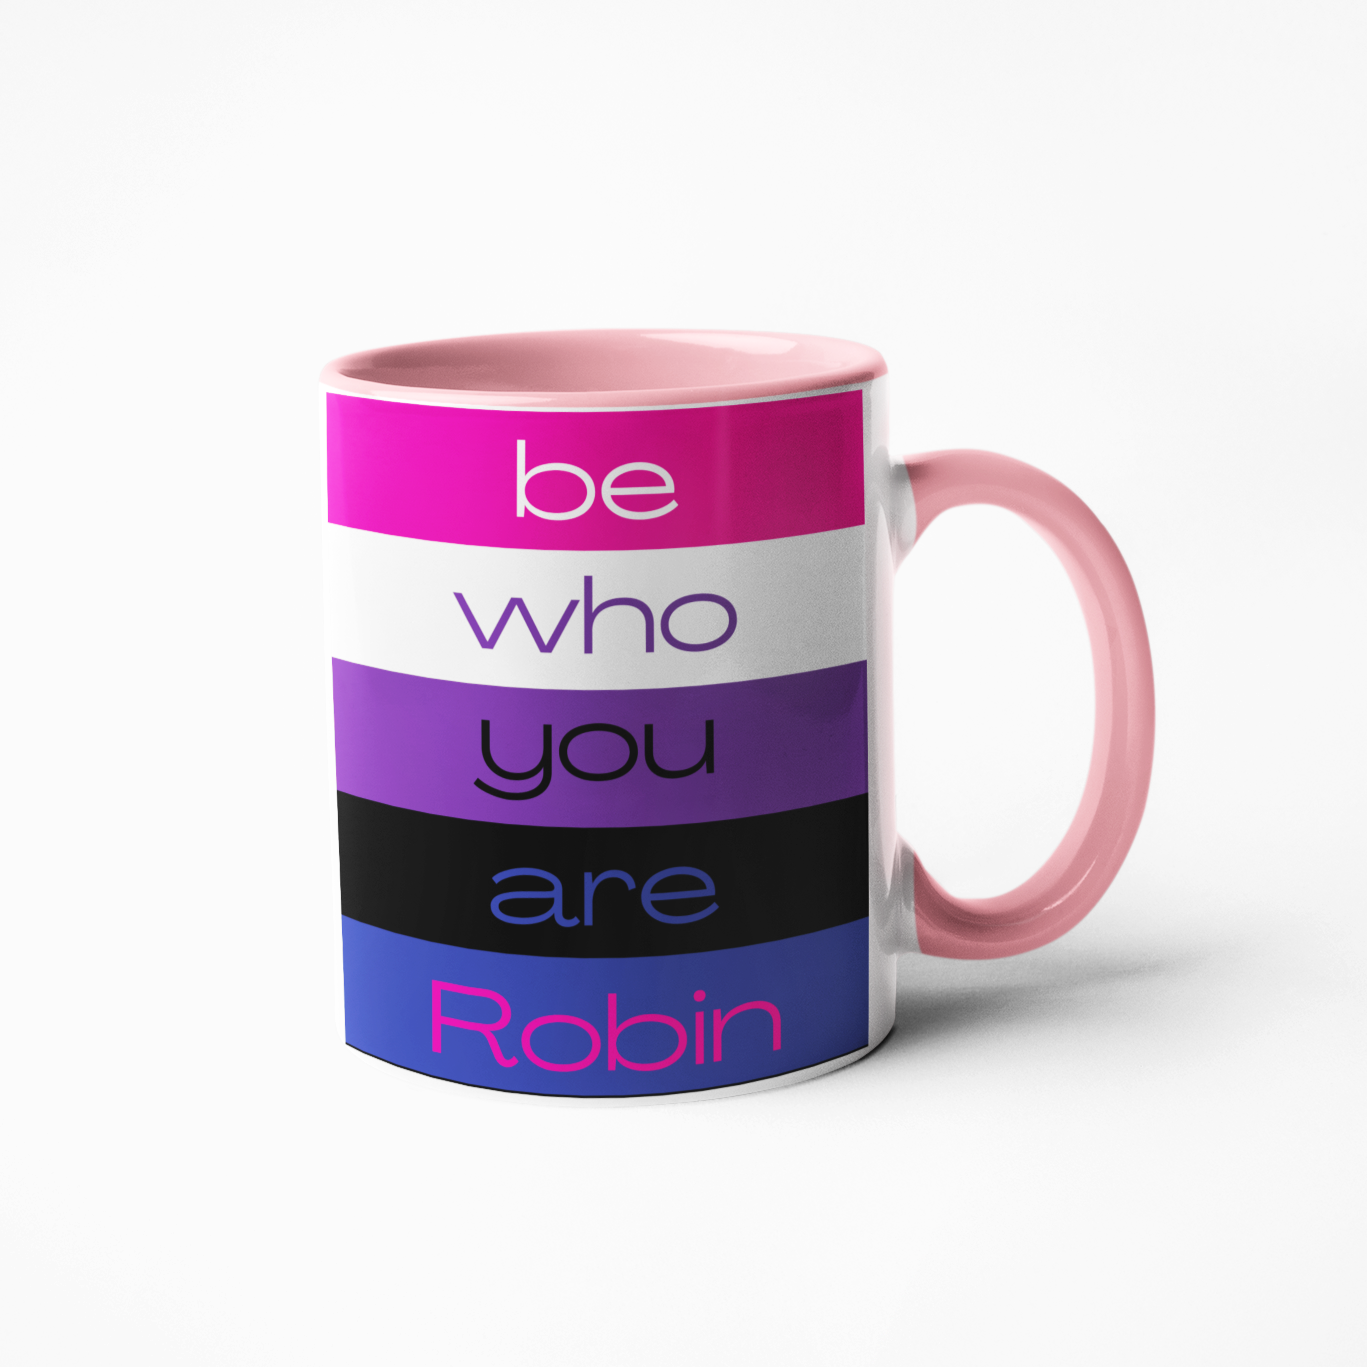 This beautiful Gender fluid LGBTQIA personalised coffee mug is a perfect gift for any gender fluid person. It is a great way of showing your support and appreciation. With a glossy finish and vibrant colour, this mug will make someone you care about feel special. Get yours now!  Available in-  11oz white mug 15oz white mug 11oz black inner mug 11oz pink inner mug 9cm mdf coaster Mugs are-   Microwave safe Dishwasher safe Printed both sides